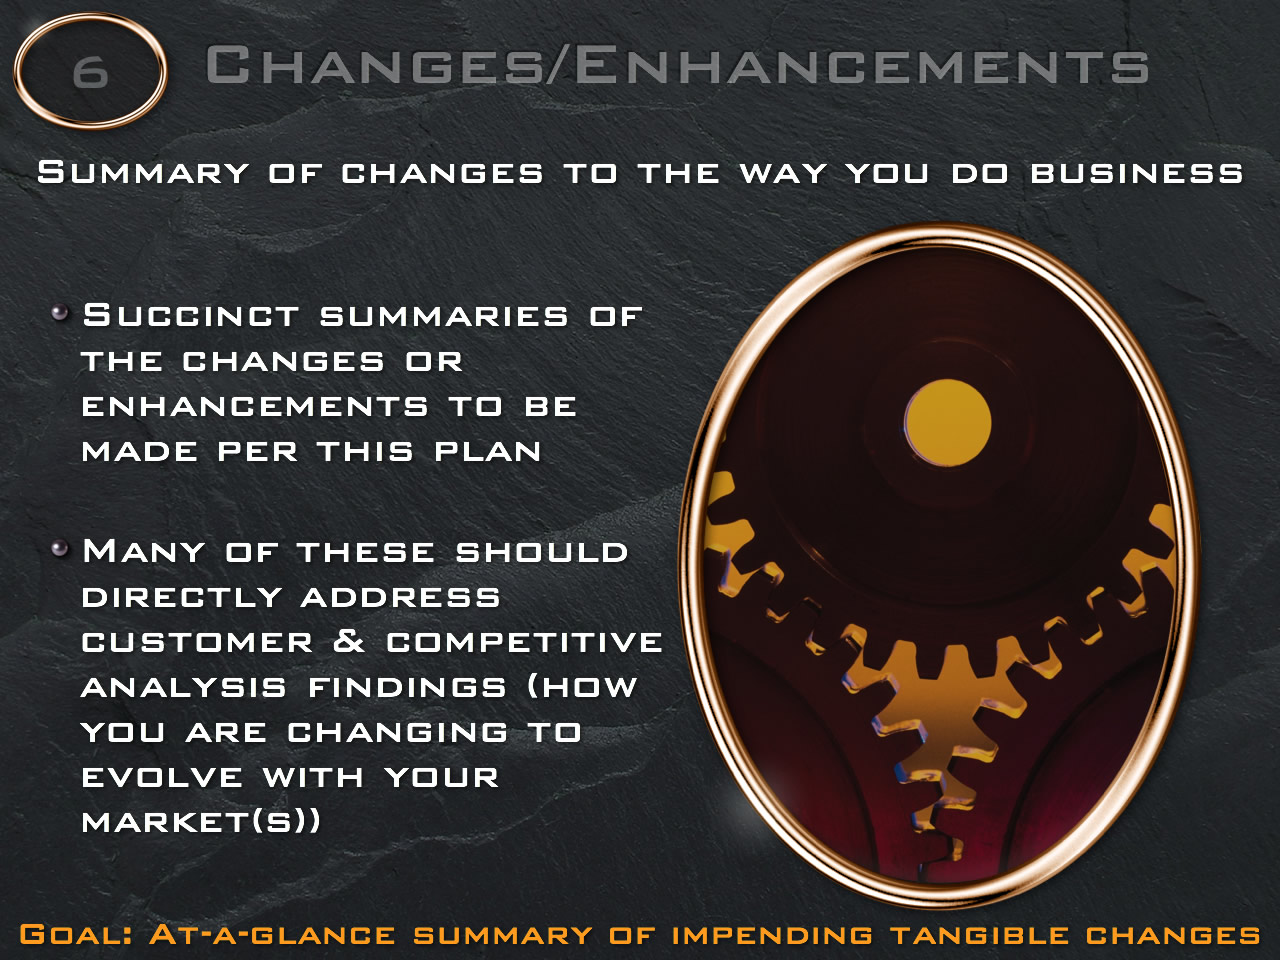 Summarizing the changes and enhancements to be made in support of new business plan campaigns and tactics